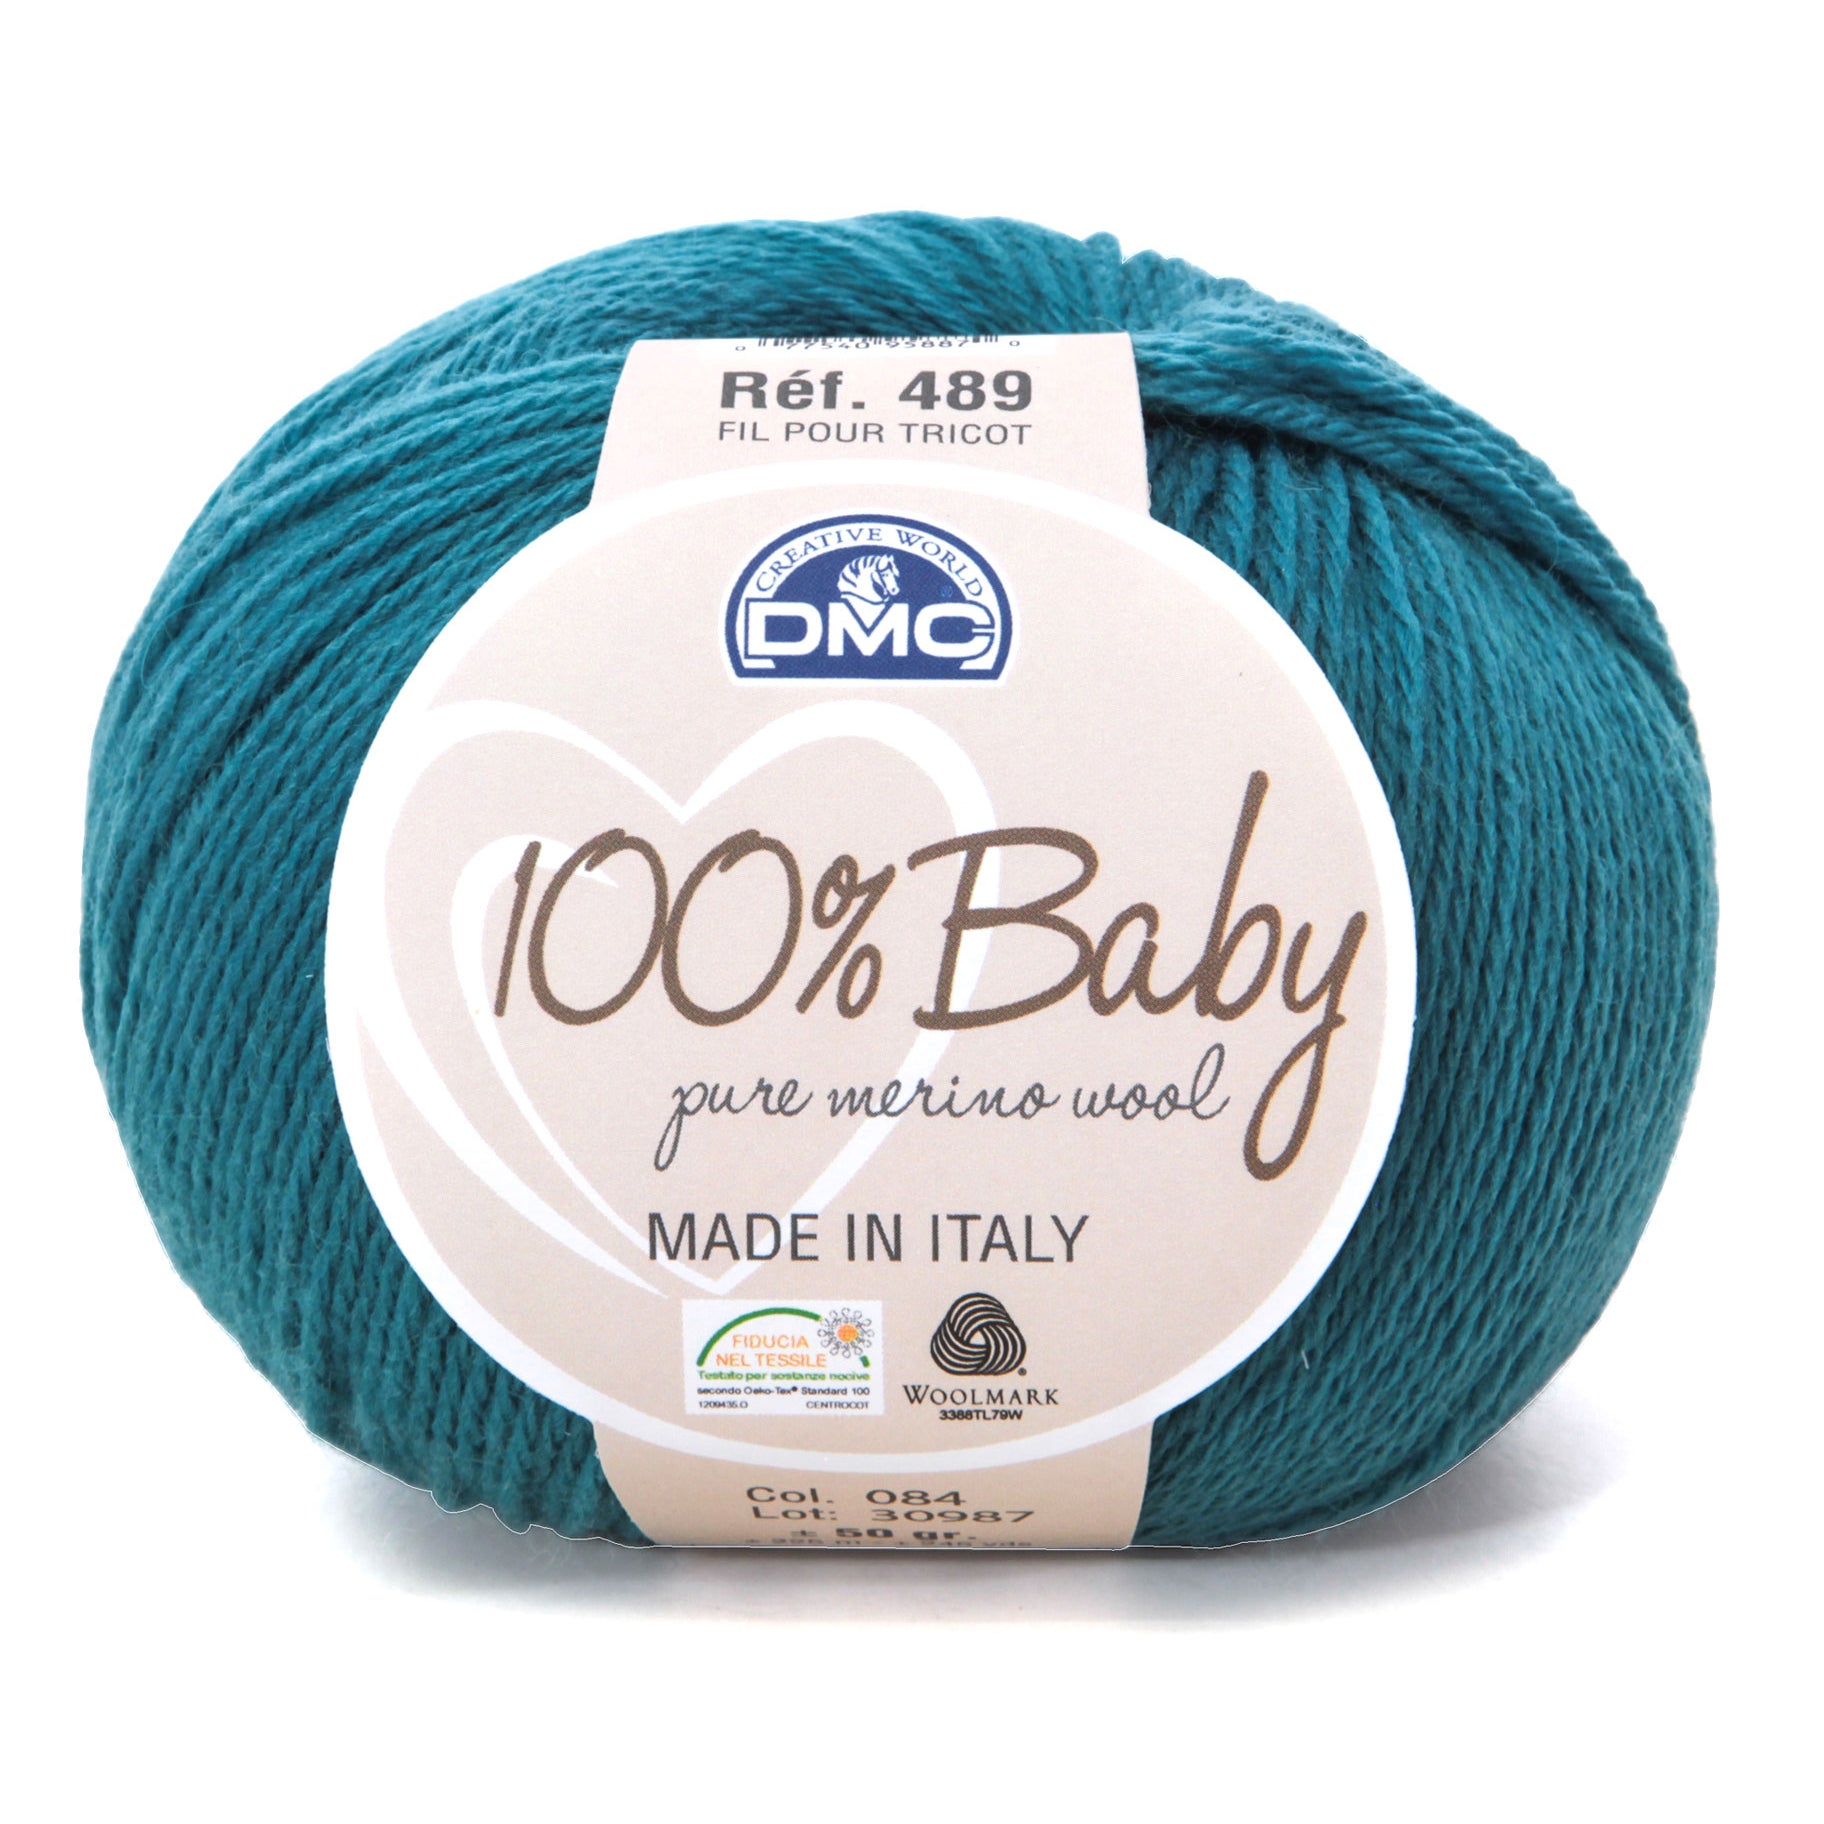 DMC 100% Baby Wool - Softness and Warmth in Every Stitch